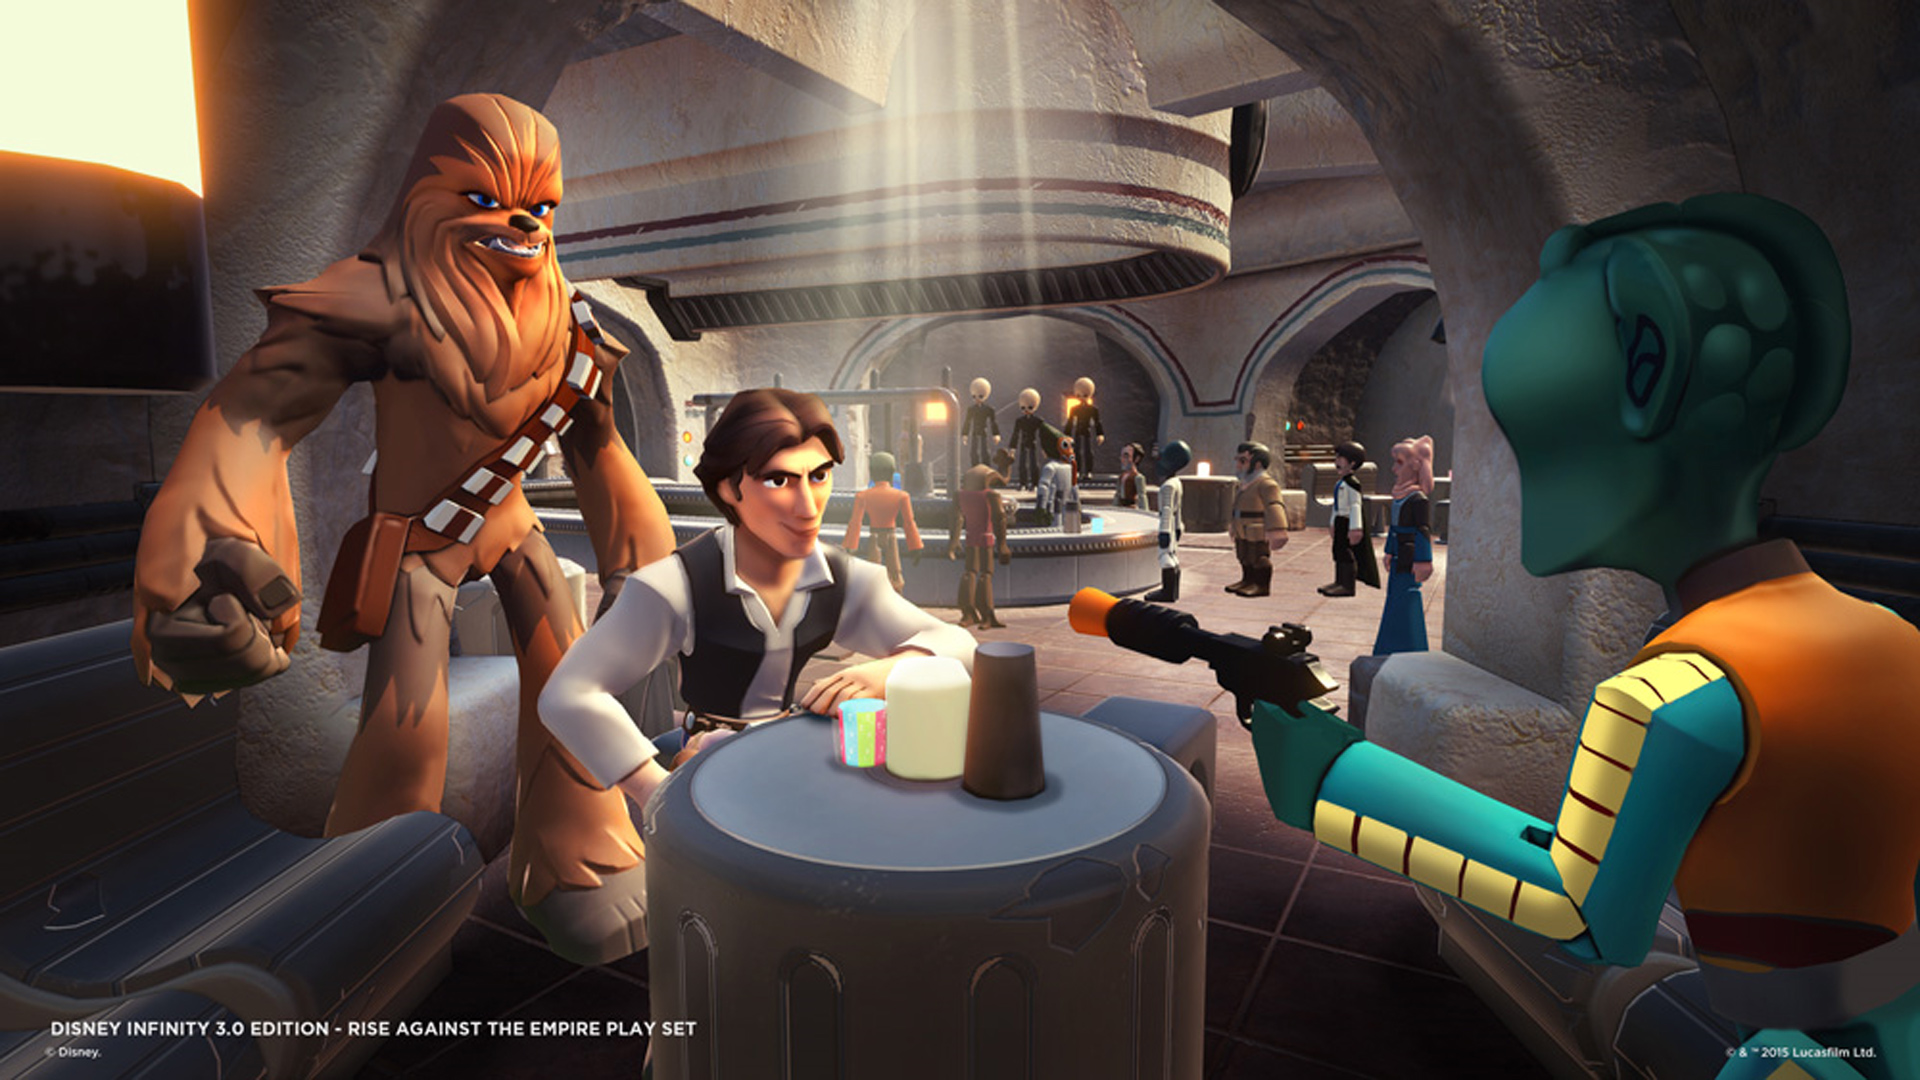 Disney Infinity 3.0 Edition shown at E3 2015